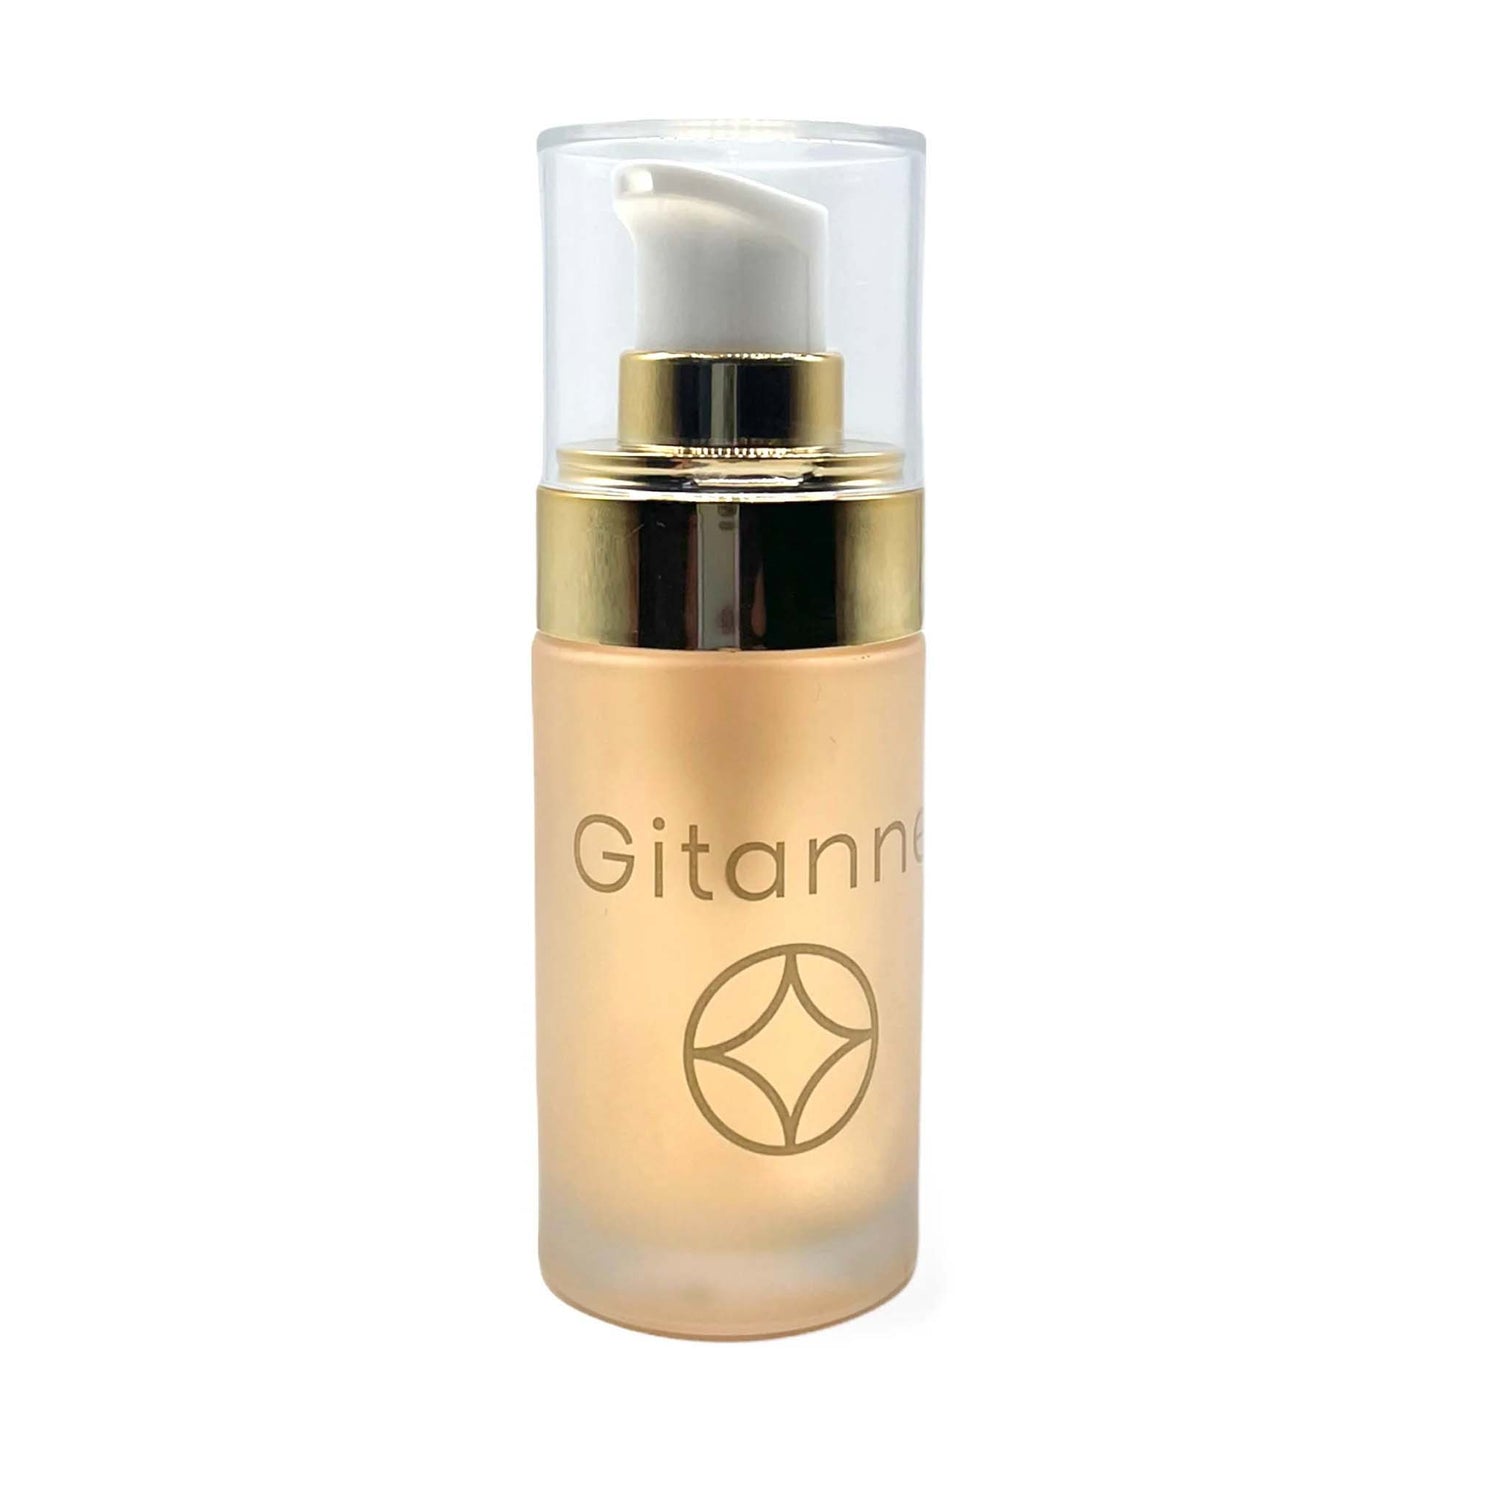 Gitanne Rose Balancing Face Serum soothes, calms and balances the skin with this light weight serum.